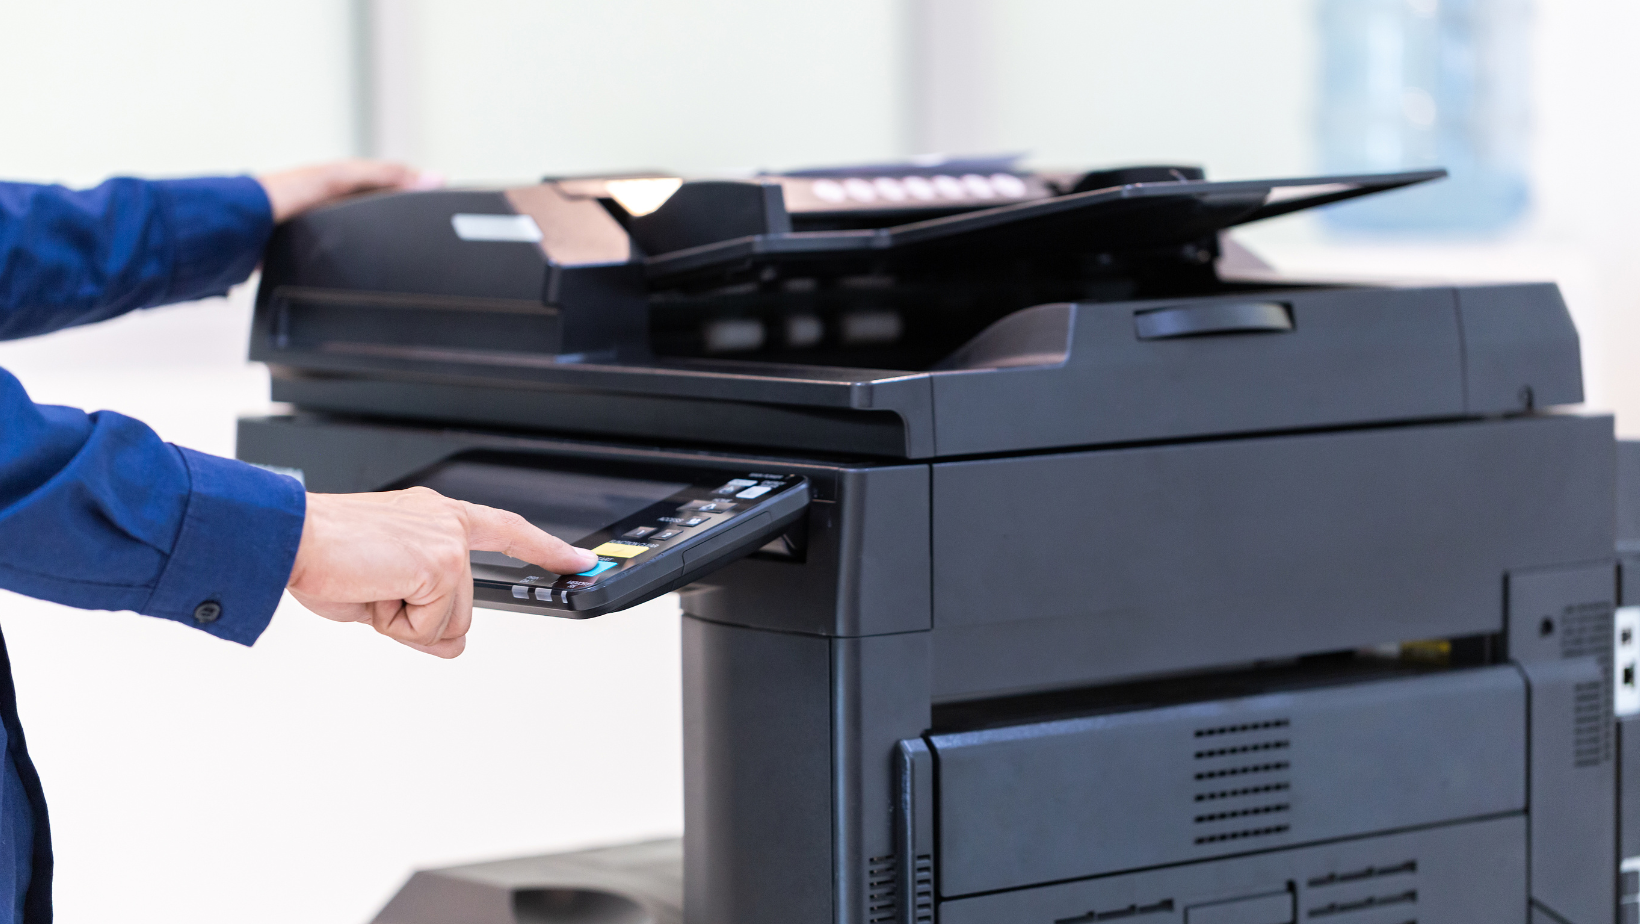 Stress-Free, Cost-Effective Office Printing Developed Around Your Needs